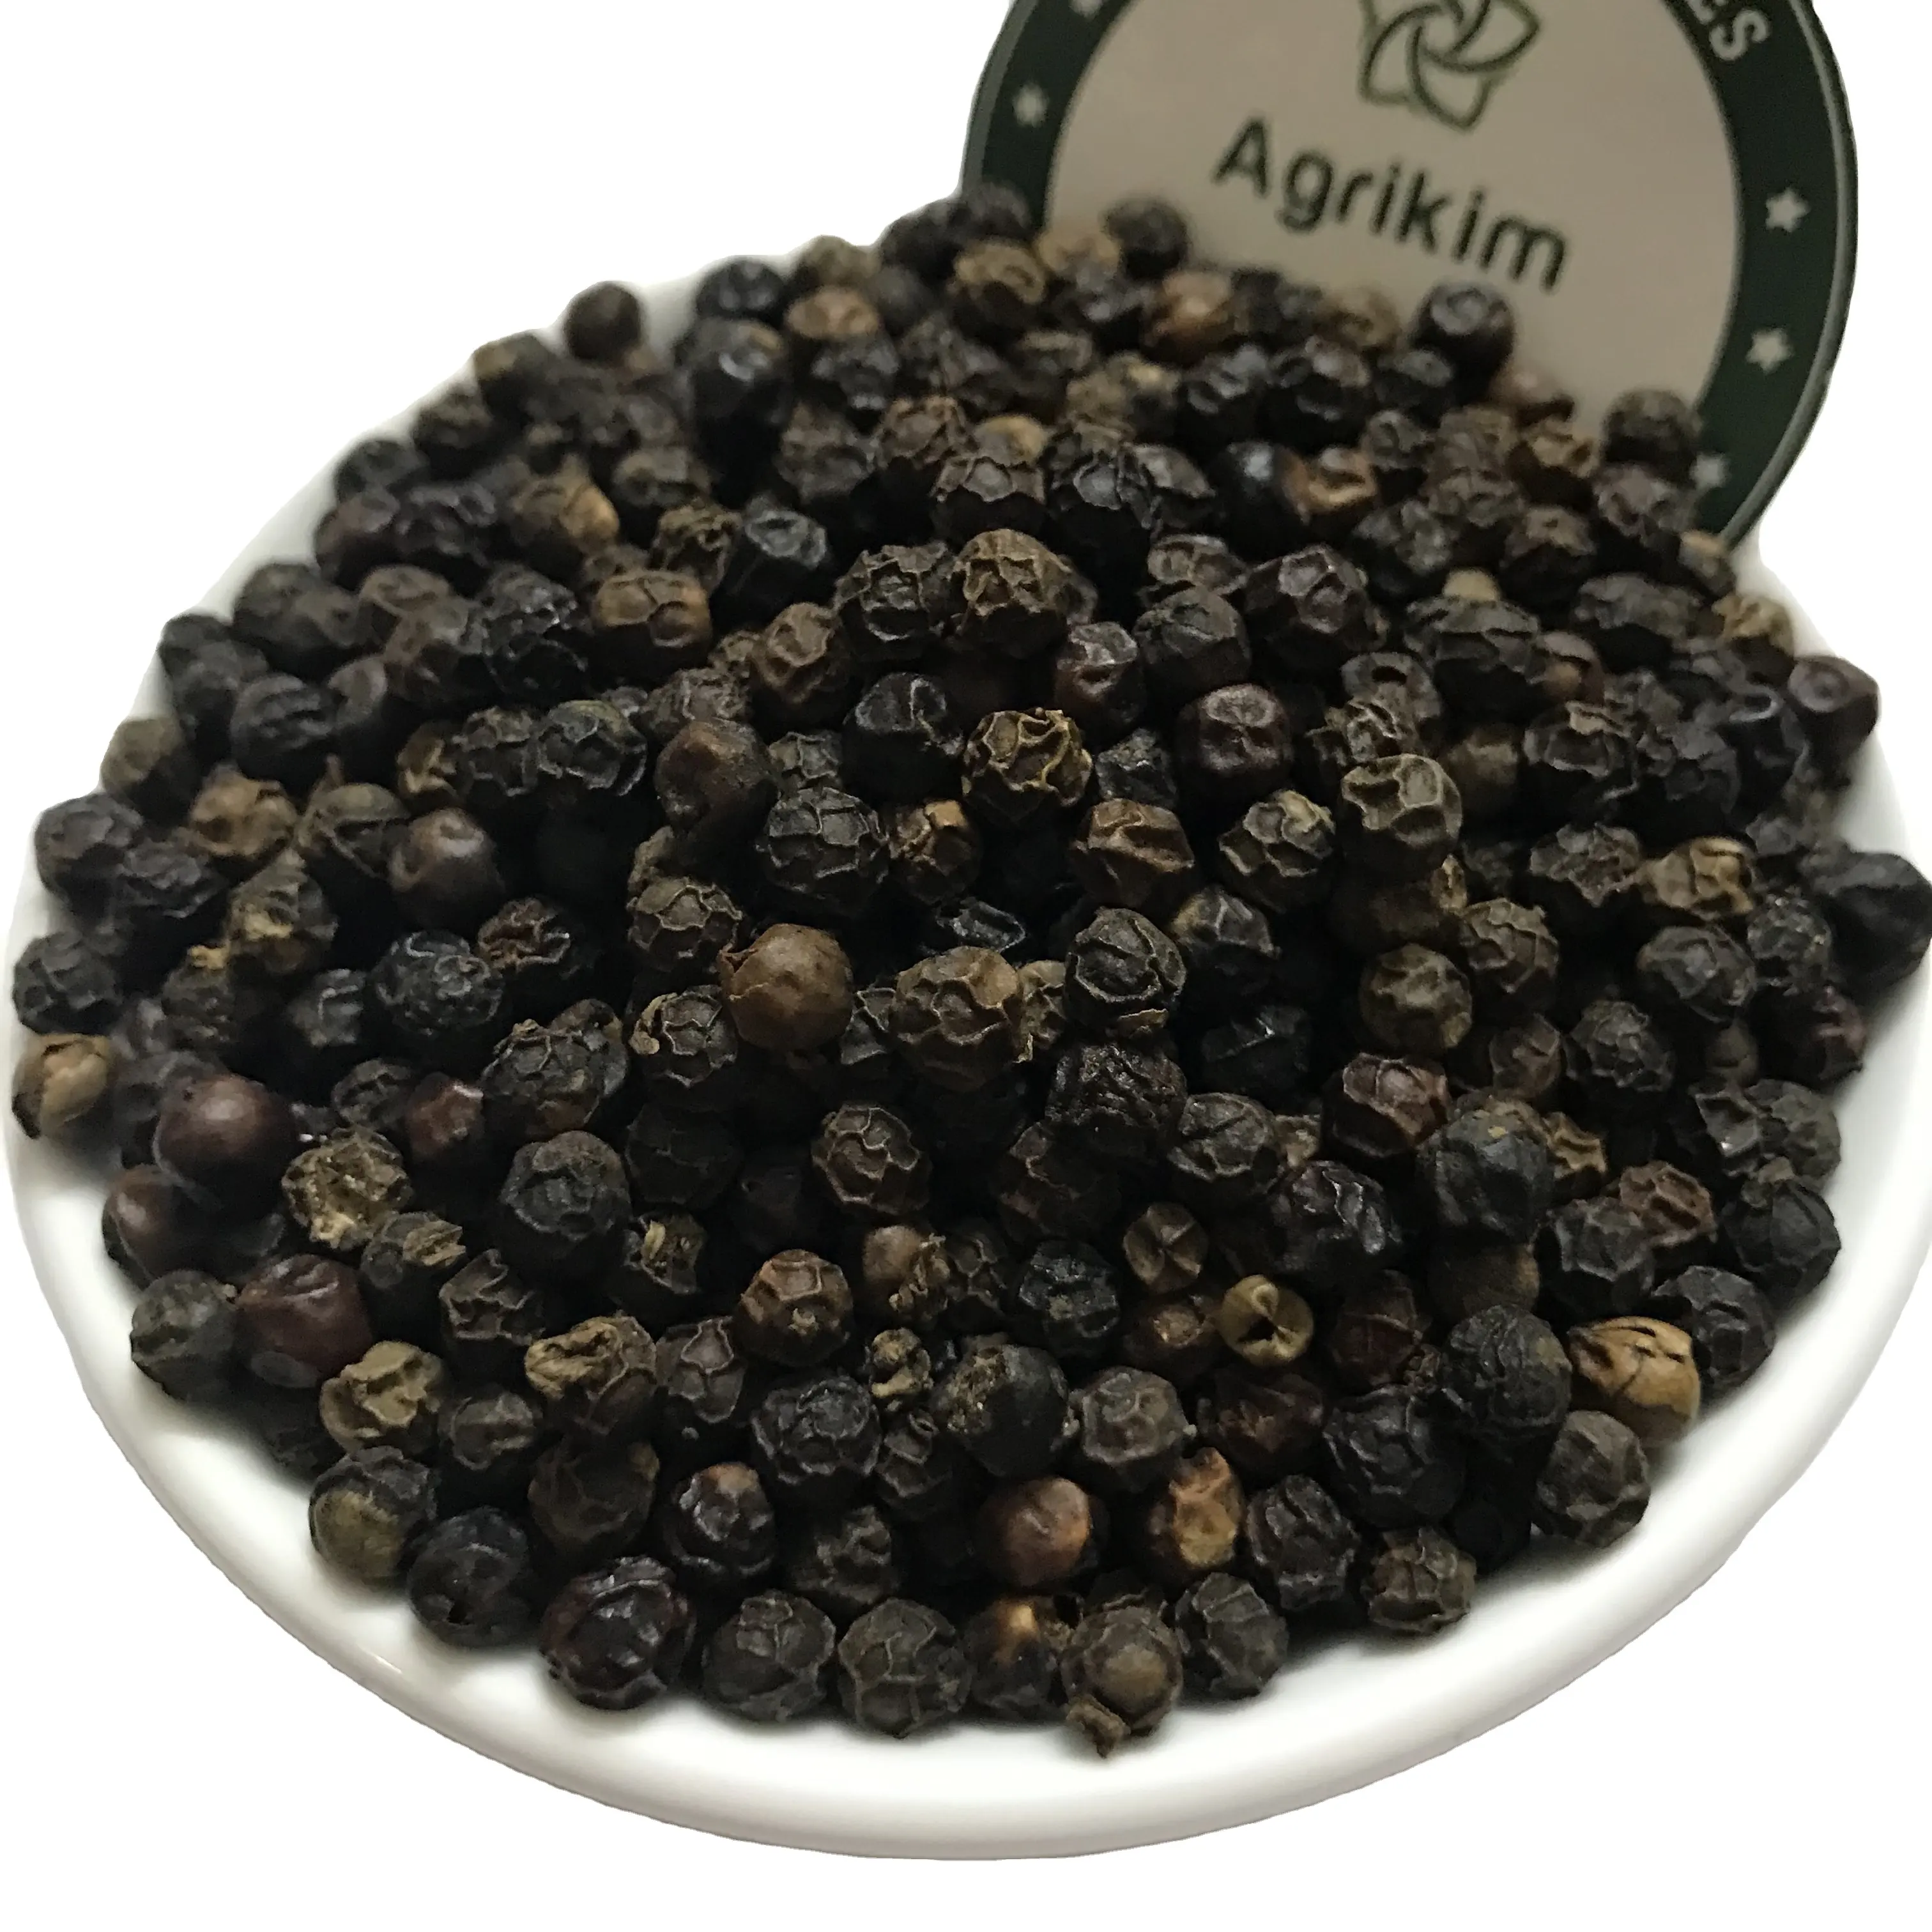 Low Price High Quality Black Pepper 5mm 500 FAQ 500 MC 550 MC Cheap Price from Reliable Supplier 0084 368 591 192